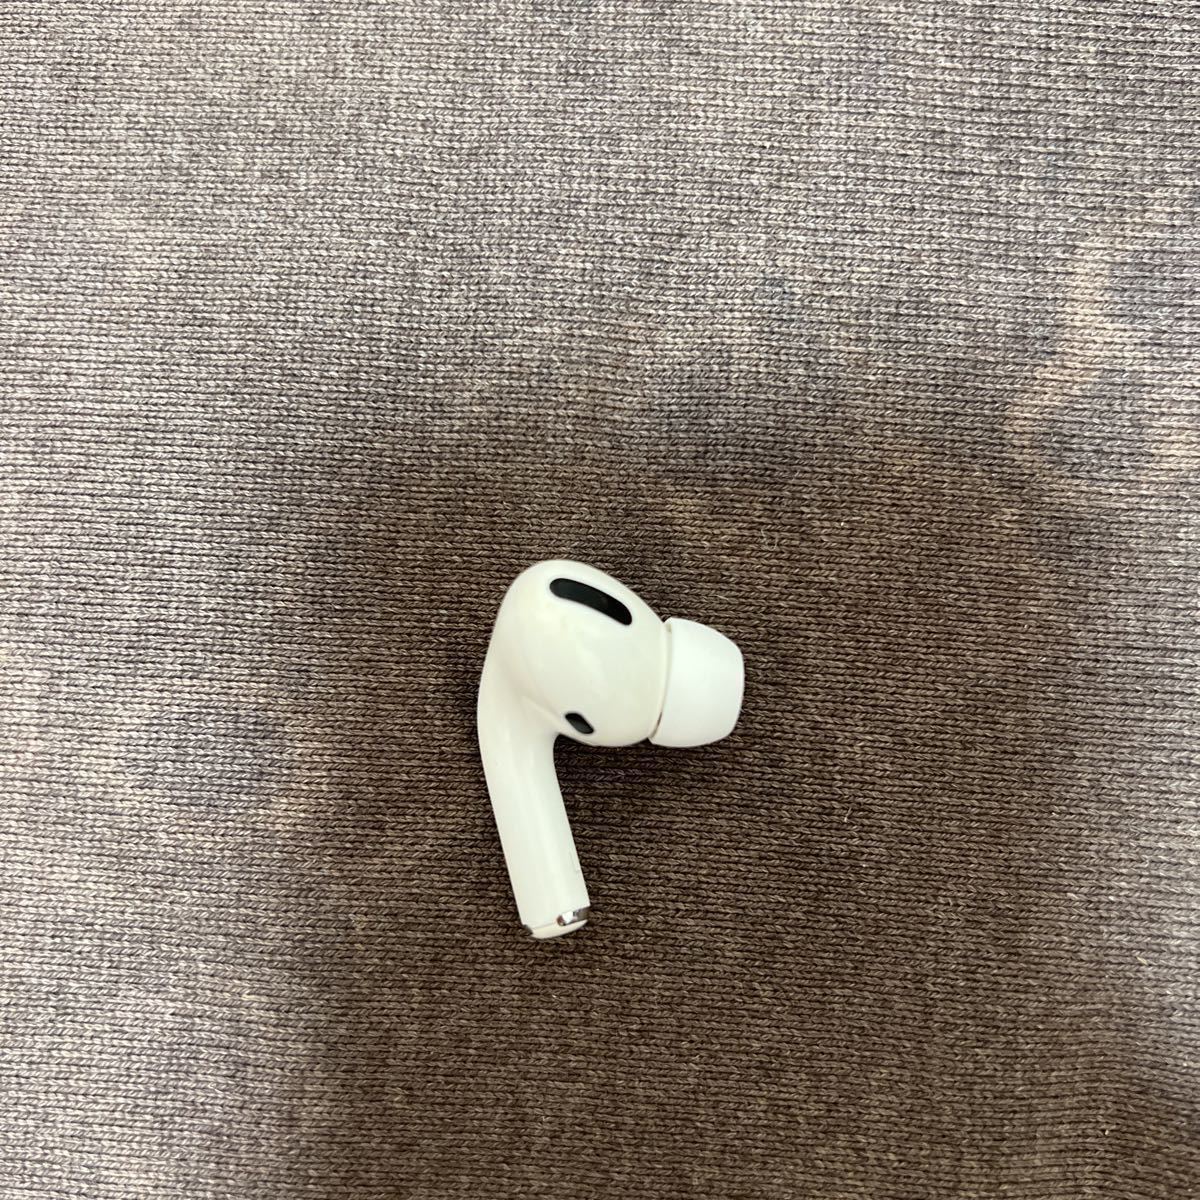 Apple純正AirPods Pro 第1世代左イヤホンMWP22J/A 左耳のみジャンク